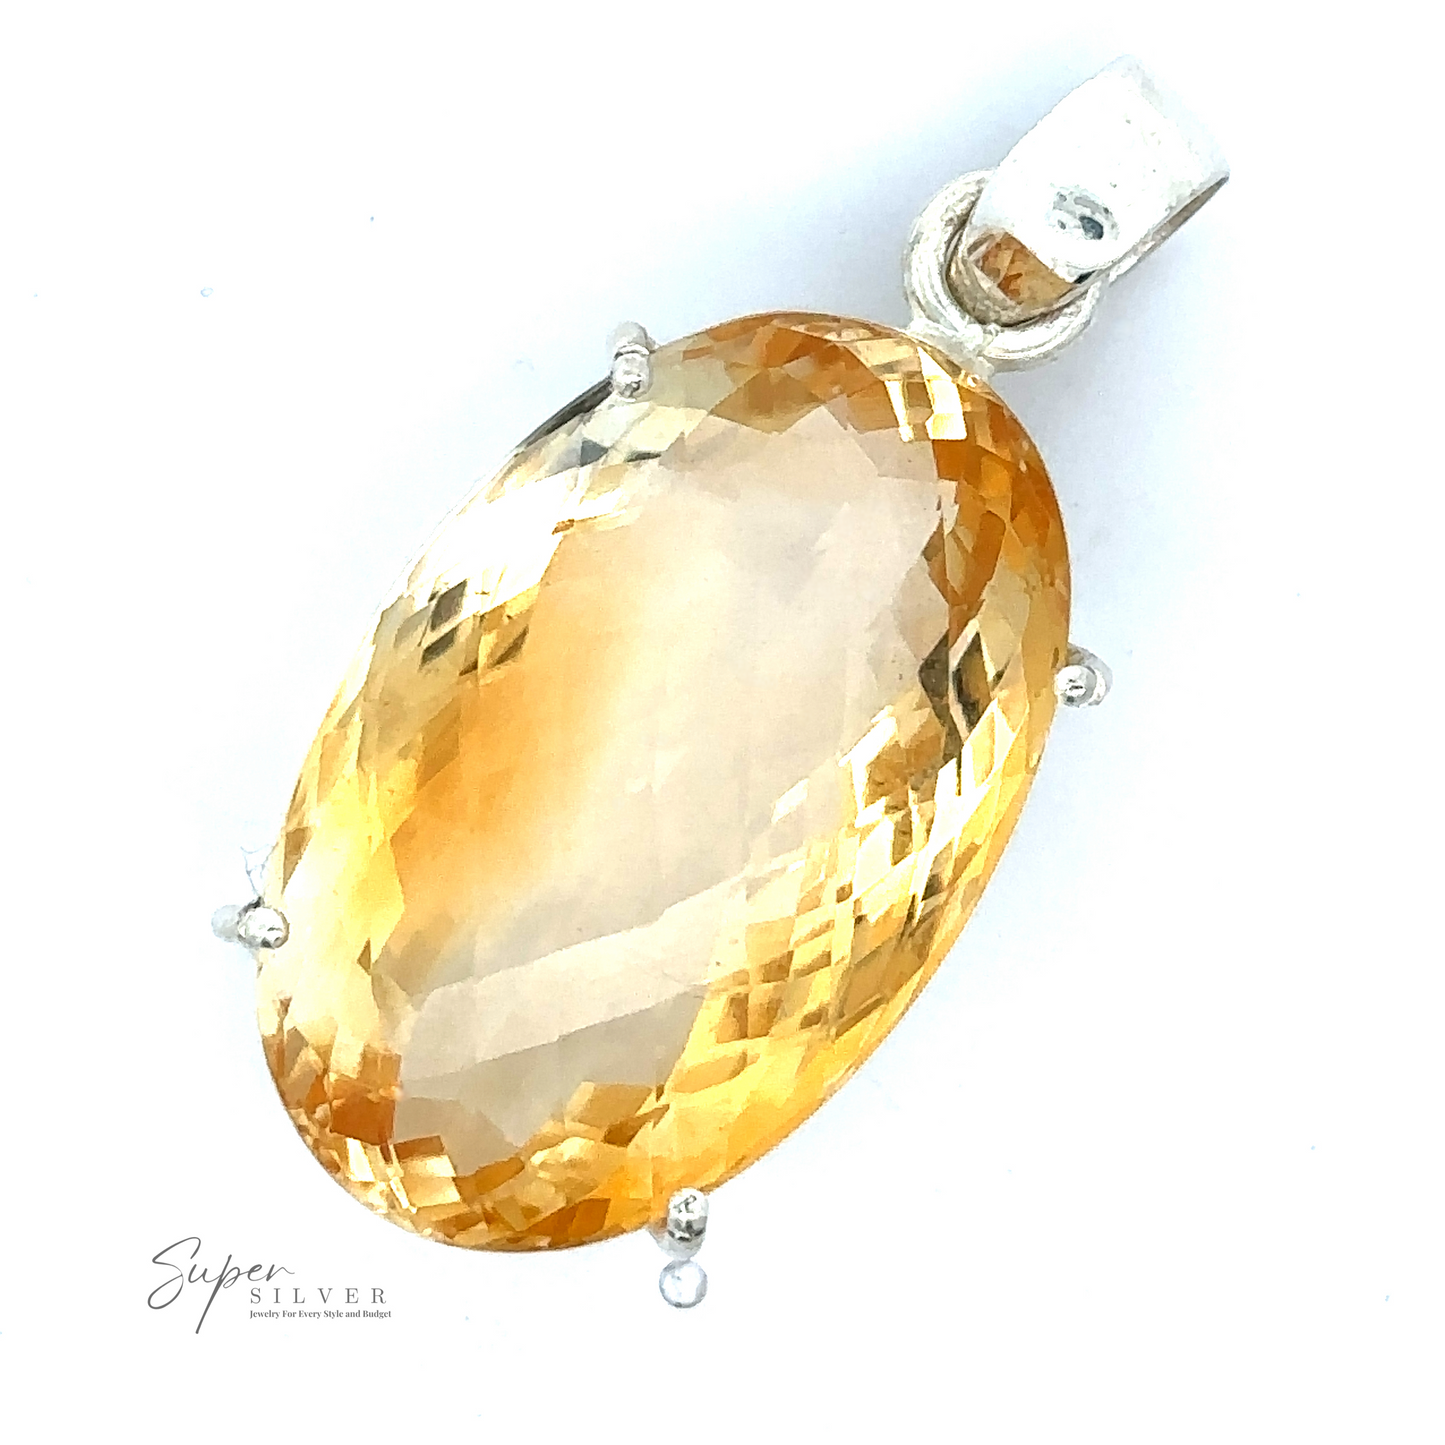 
                  
                    A Brilliant Pronged Citrine Pendant featuring an oval-shaped, faceted yellow gemstone set in .925 Sterling Silver with a bail. Text "Super Silver" is visible in the bottom left corner.
                  
                